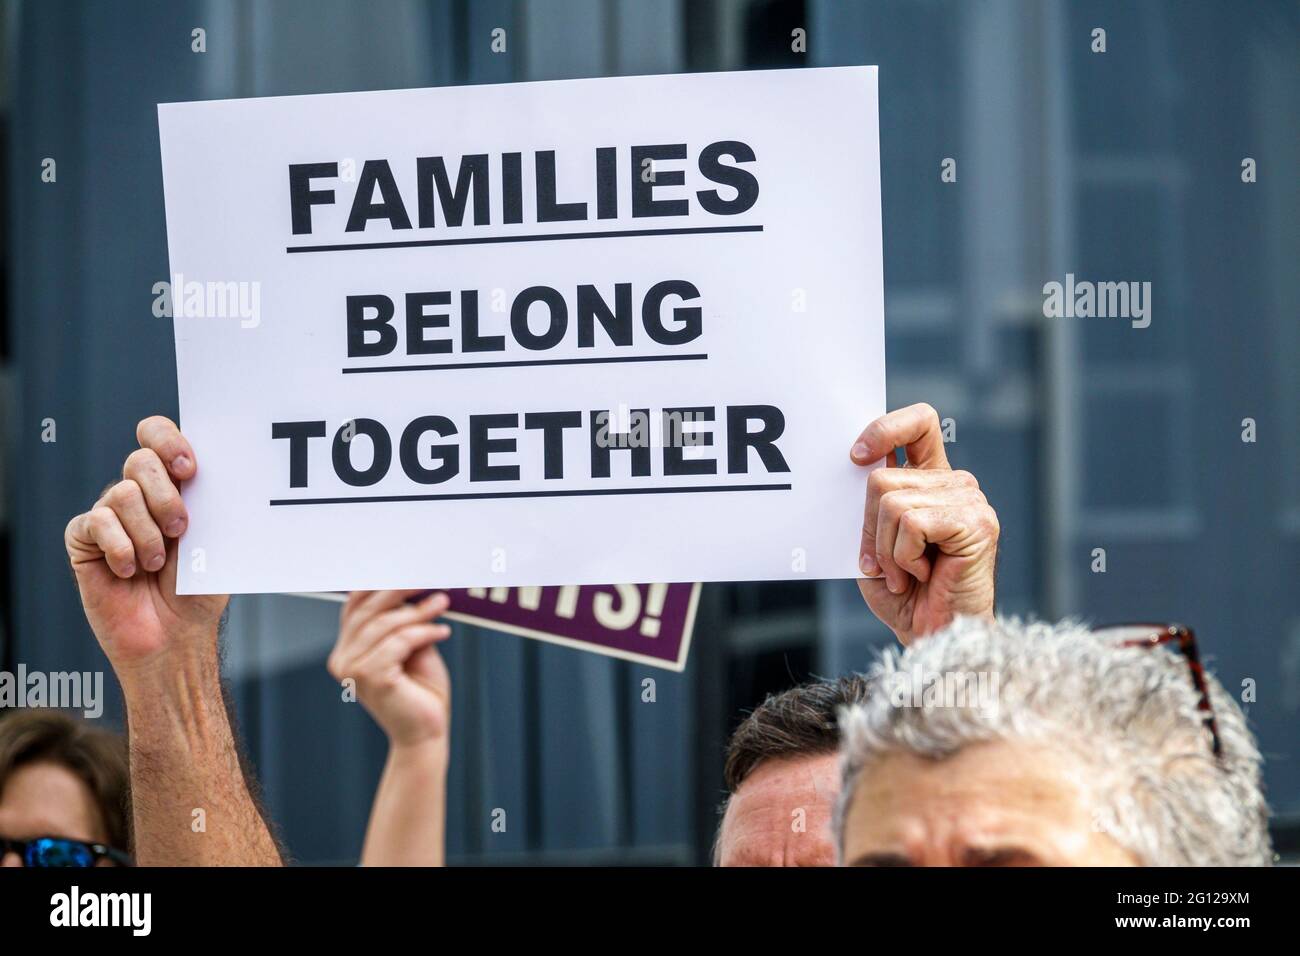 Florida Miami downtown Keep Families Together Protest anti-Trump immigration family child separation policy activist protester sign Stock Photo